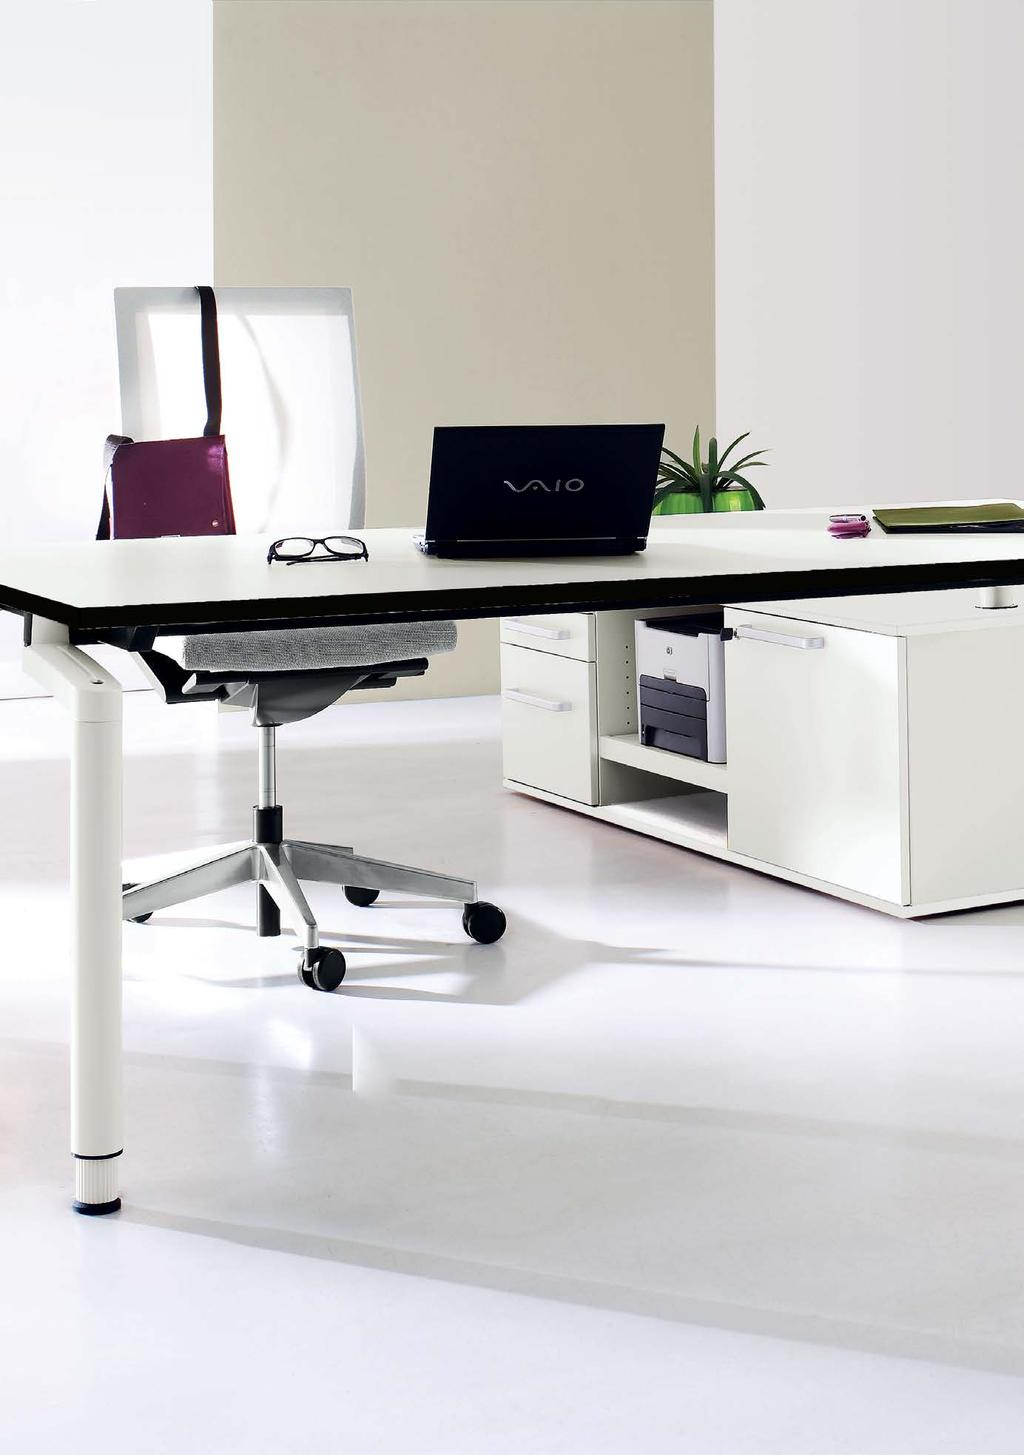 M series work desk system with technical sideboard 41 Classic look with impressive details The M series is characterised by